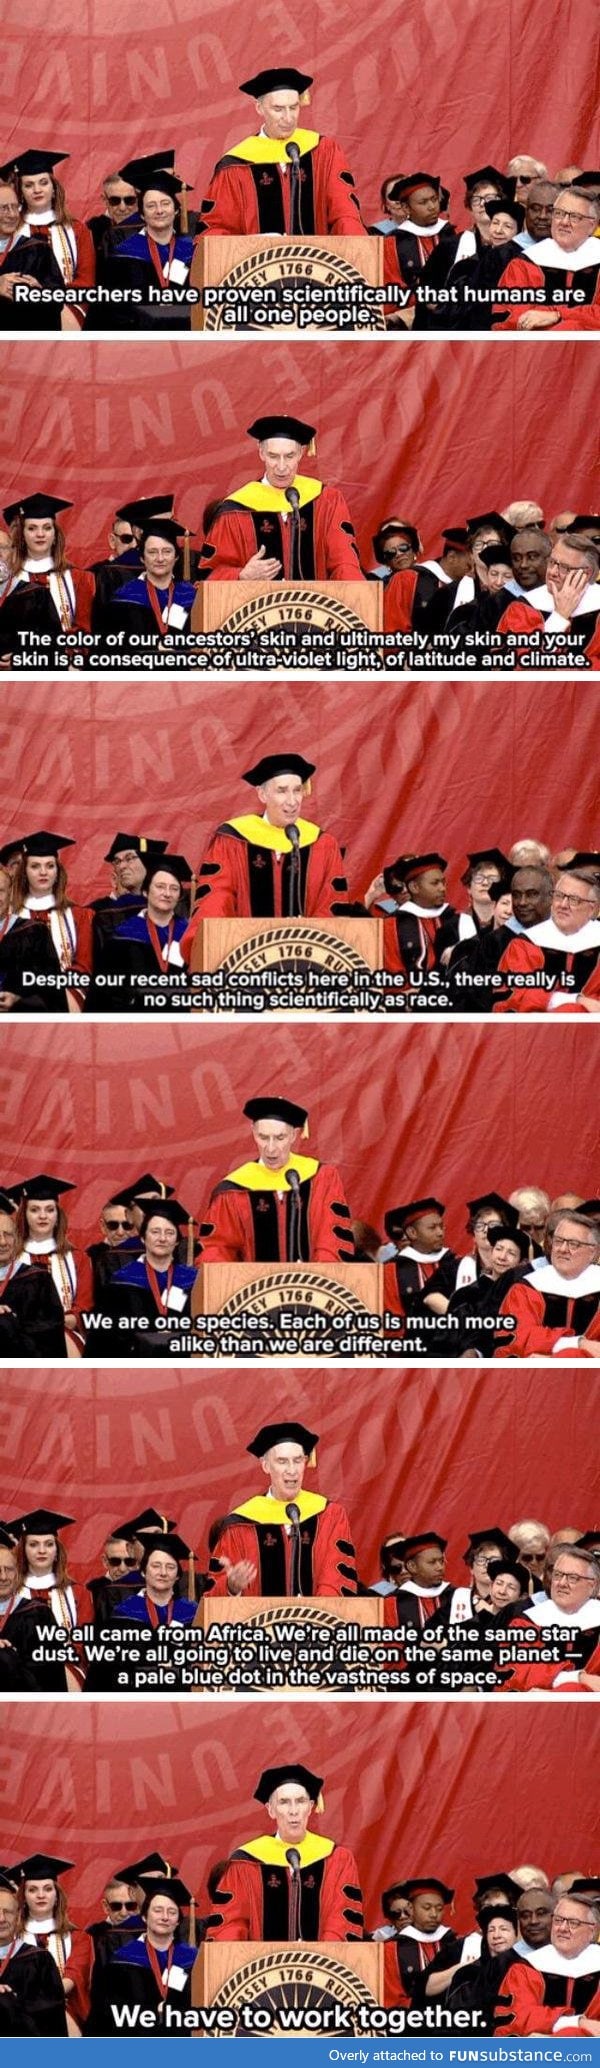 Bill Nye never fails to win my respect